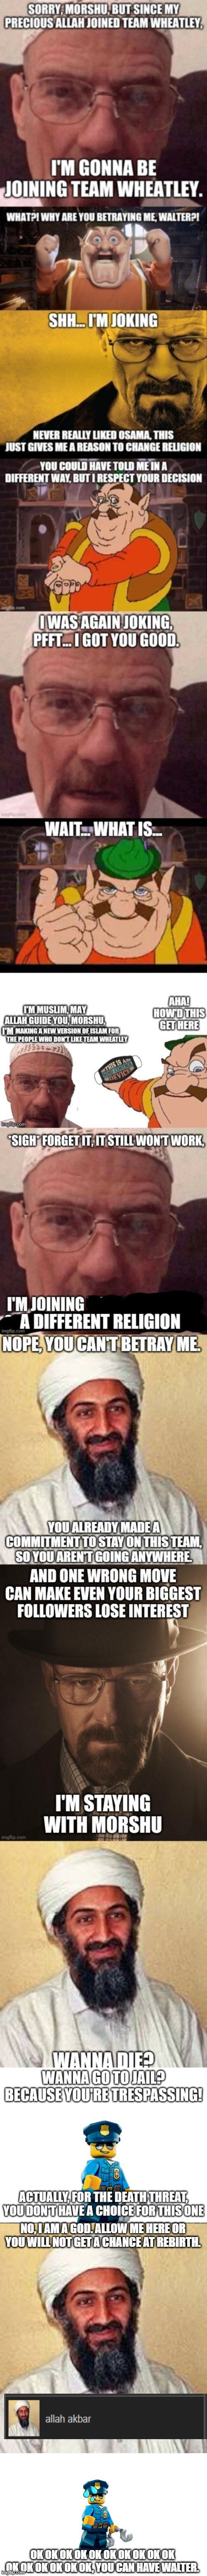 Even if Allah did go to jail, he's a god and he can get out | NO, I AM A GOD. ALLOW ME HERE OR YOU WILL NOT GET A CHANCE AT REBIRTH. OK OK OK OK OK OK OK OK OK OK OK OK OK OK OK OK, YOU CAN HAVE WALTER. | image tagged in allah akbar | made w/ Imgflip meme maker